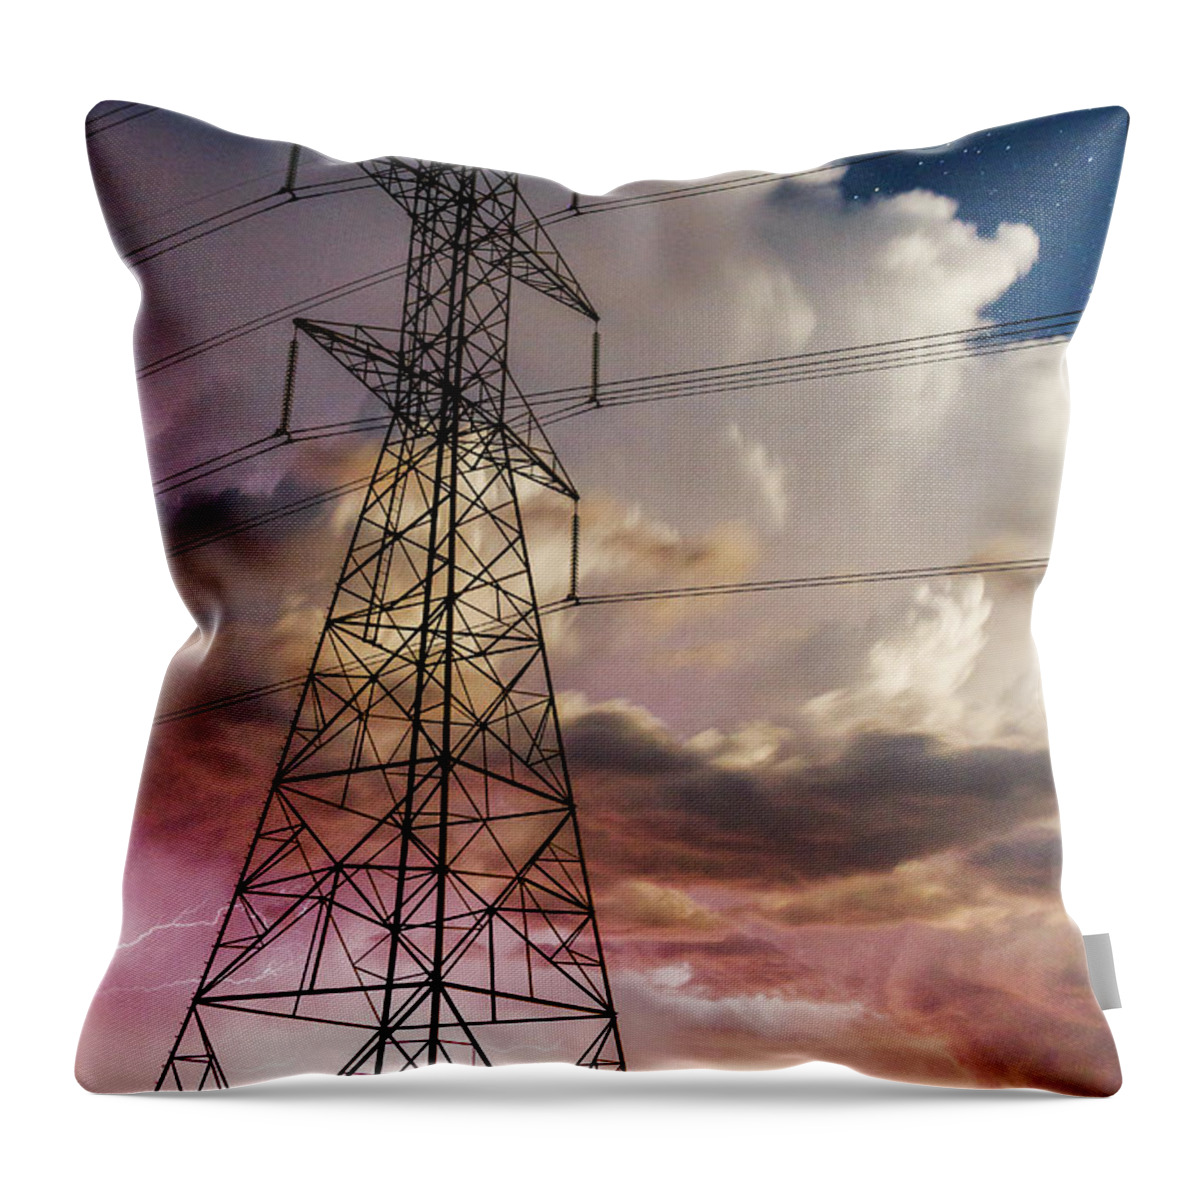 2017 April Throw Pillow featuring the photograph Storm Power by Bill Kesler